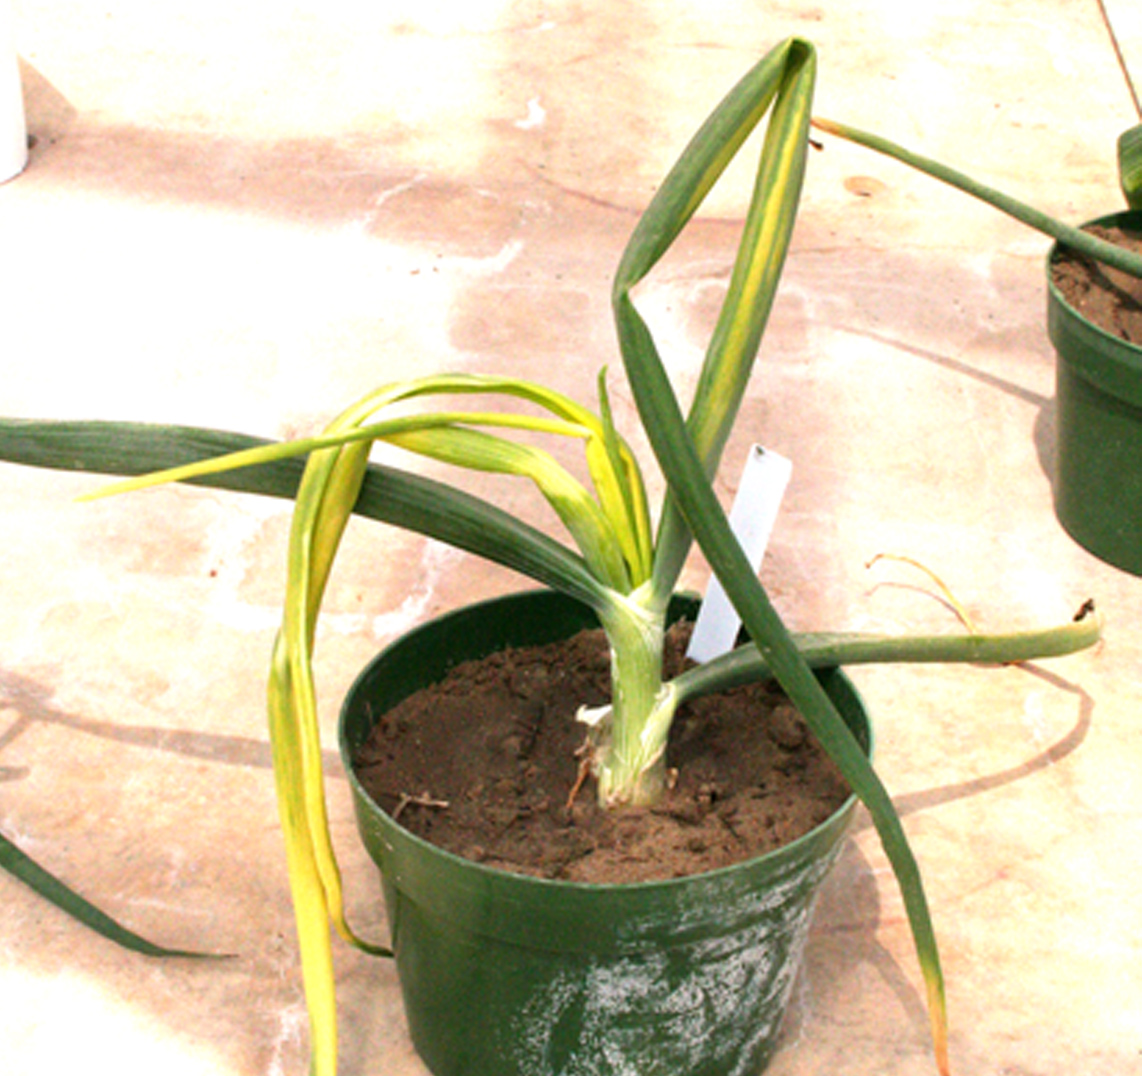 Pictured is an onion plant infected with yellow bud disease.